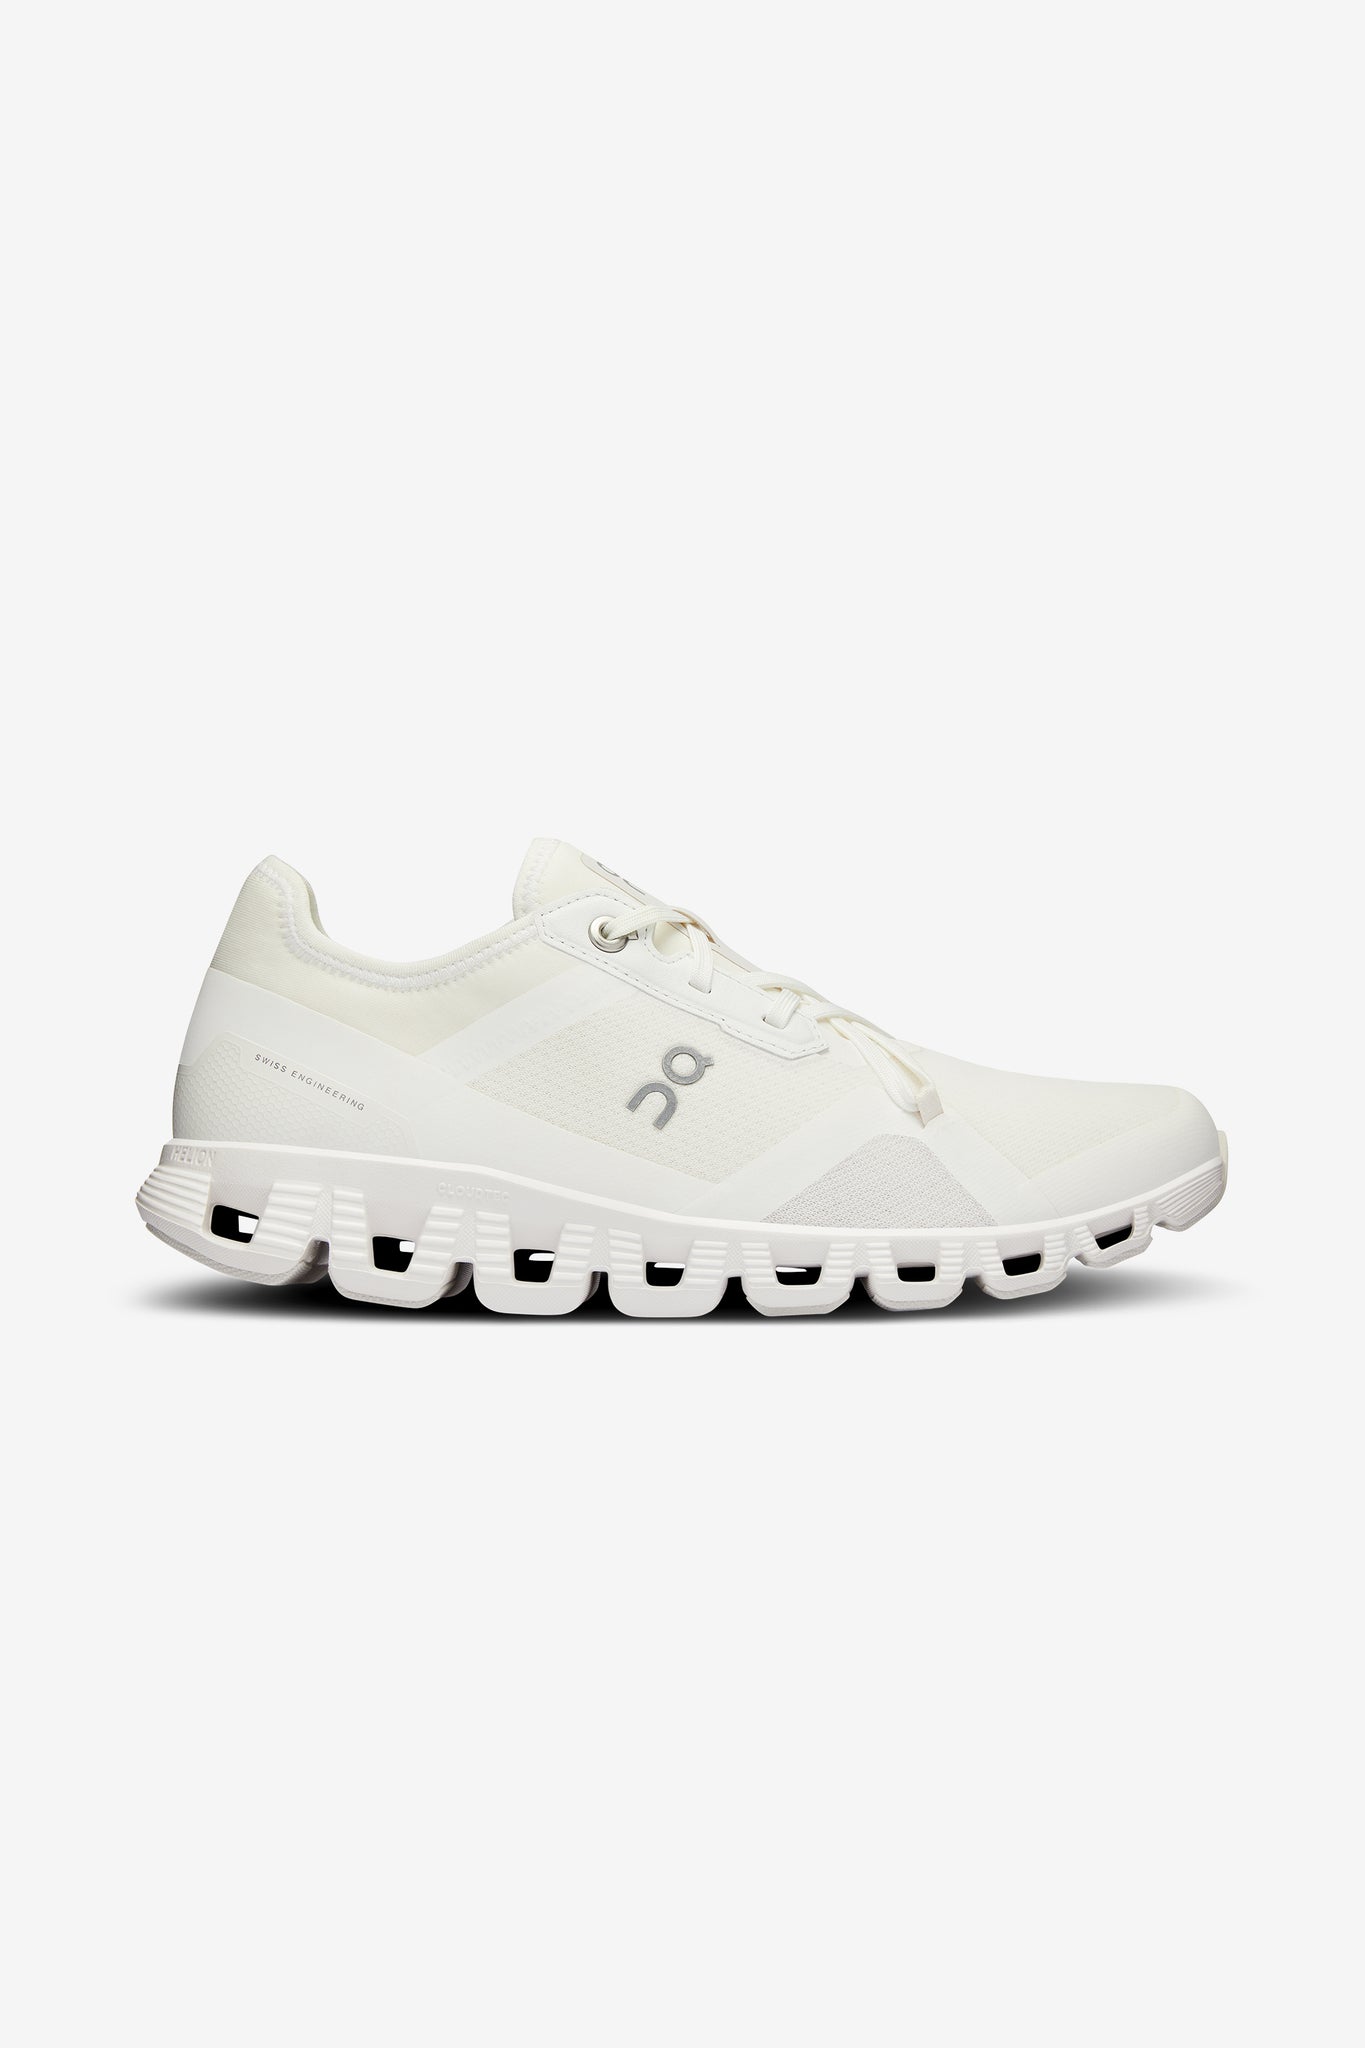 ON | Women's Cloud X 3 AD in Undyed-White/White